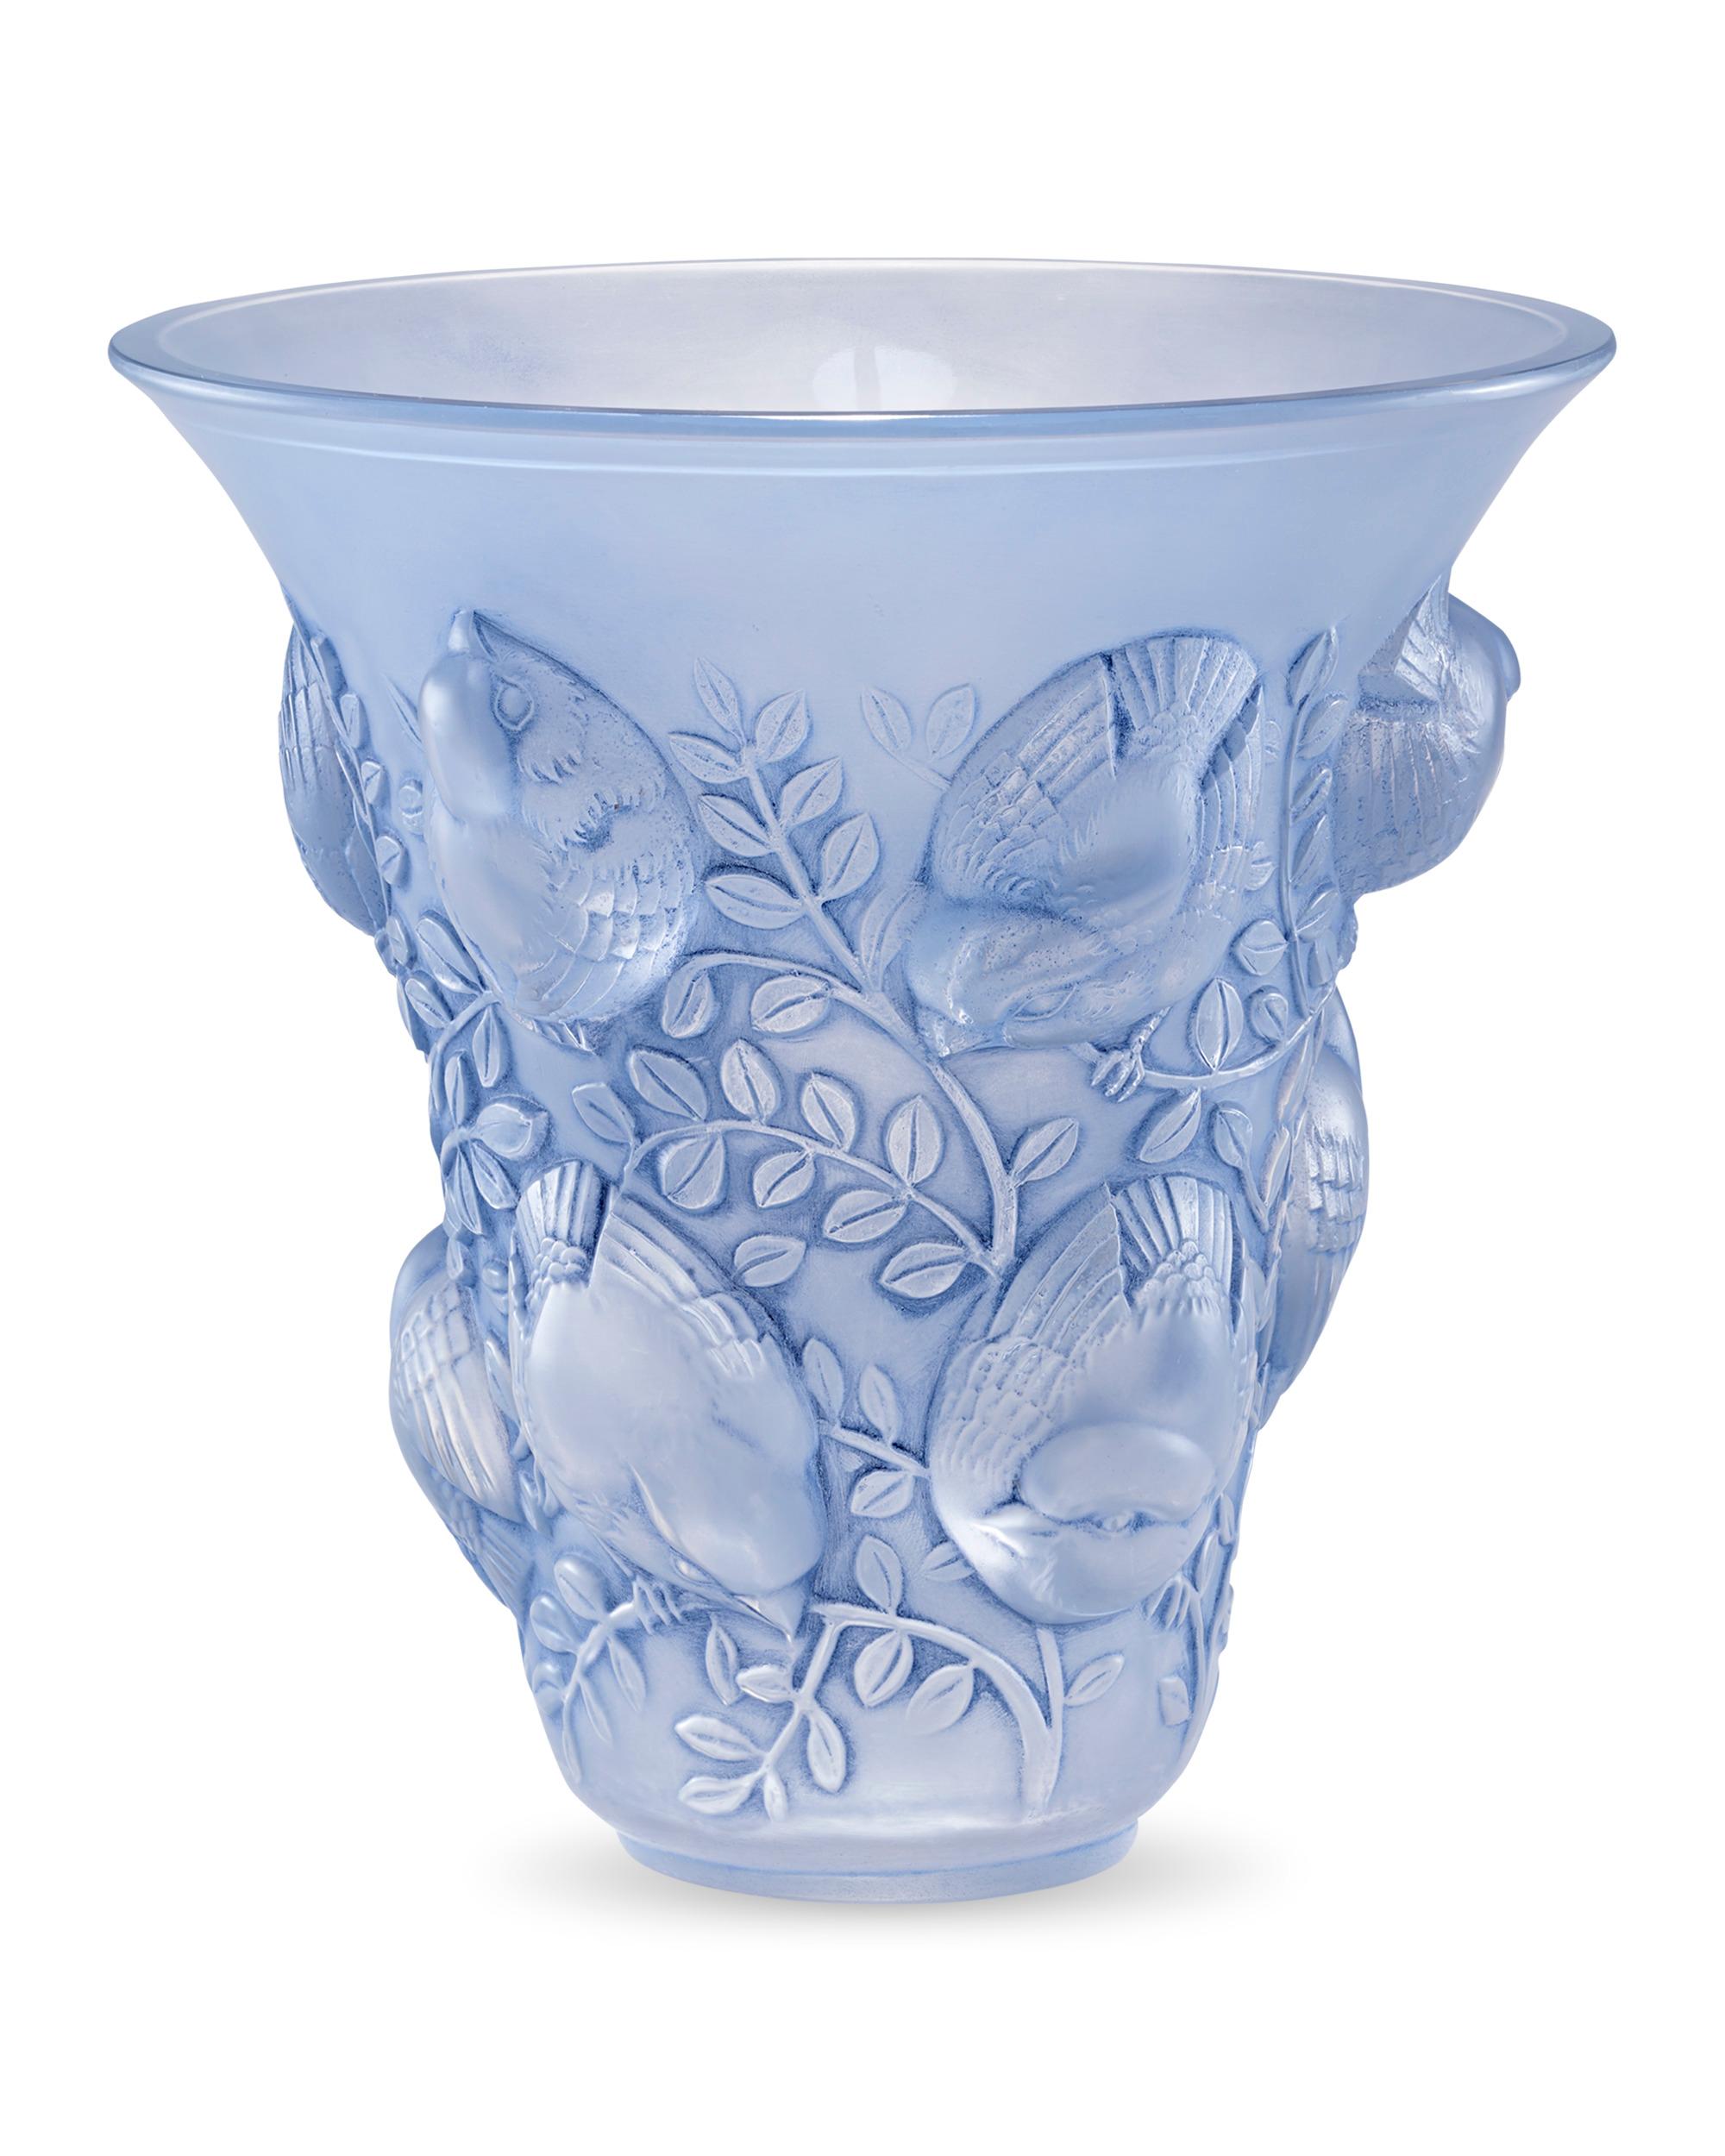 This elegant and opalescent trumpet-shaped vase comes from French glassmaker René Lalique. This motif, known as the Saint-Francois design, includes an animated scene of high-relief songbirds perched upon low-relief foliage. This vessel highlights